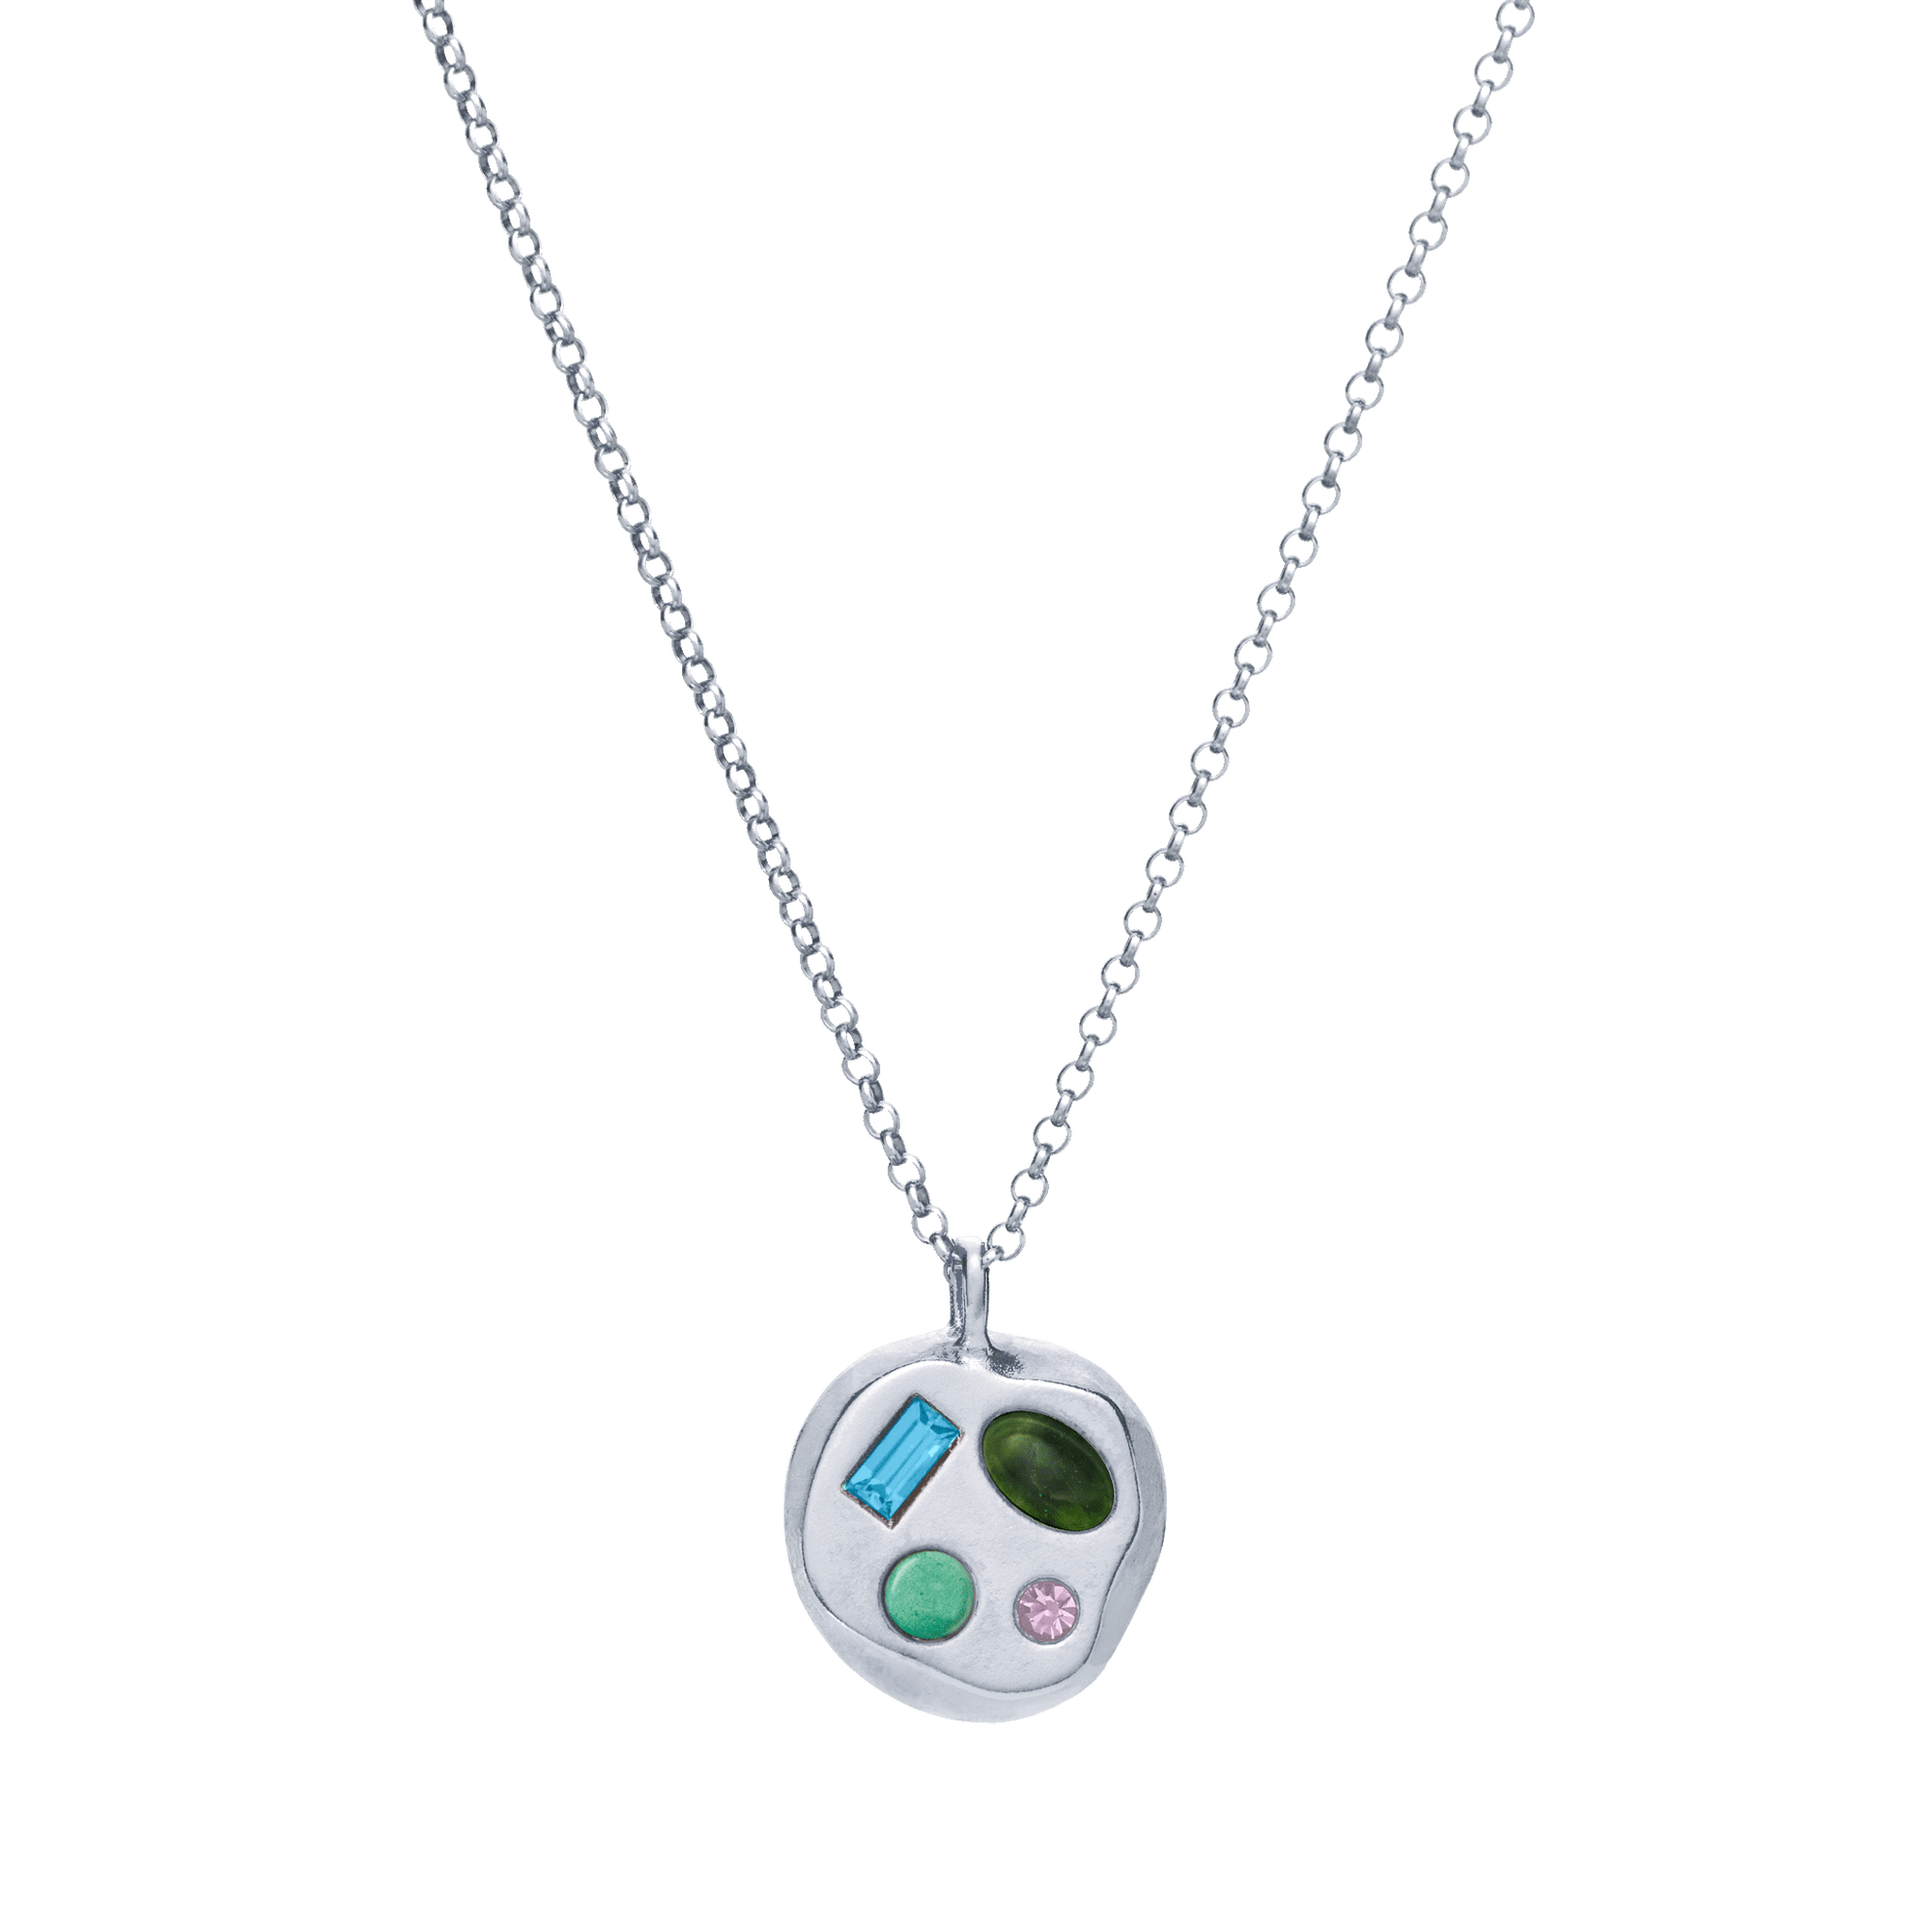 The December Fourteenth Pendant in Sterling Silver